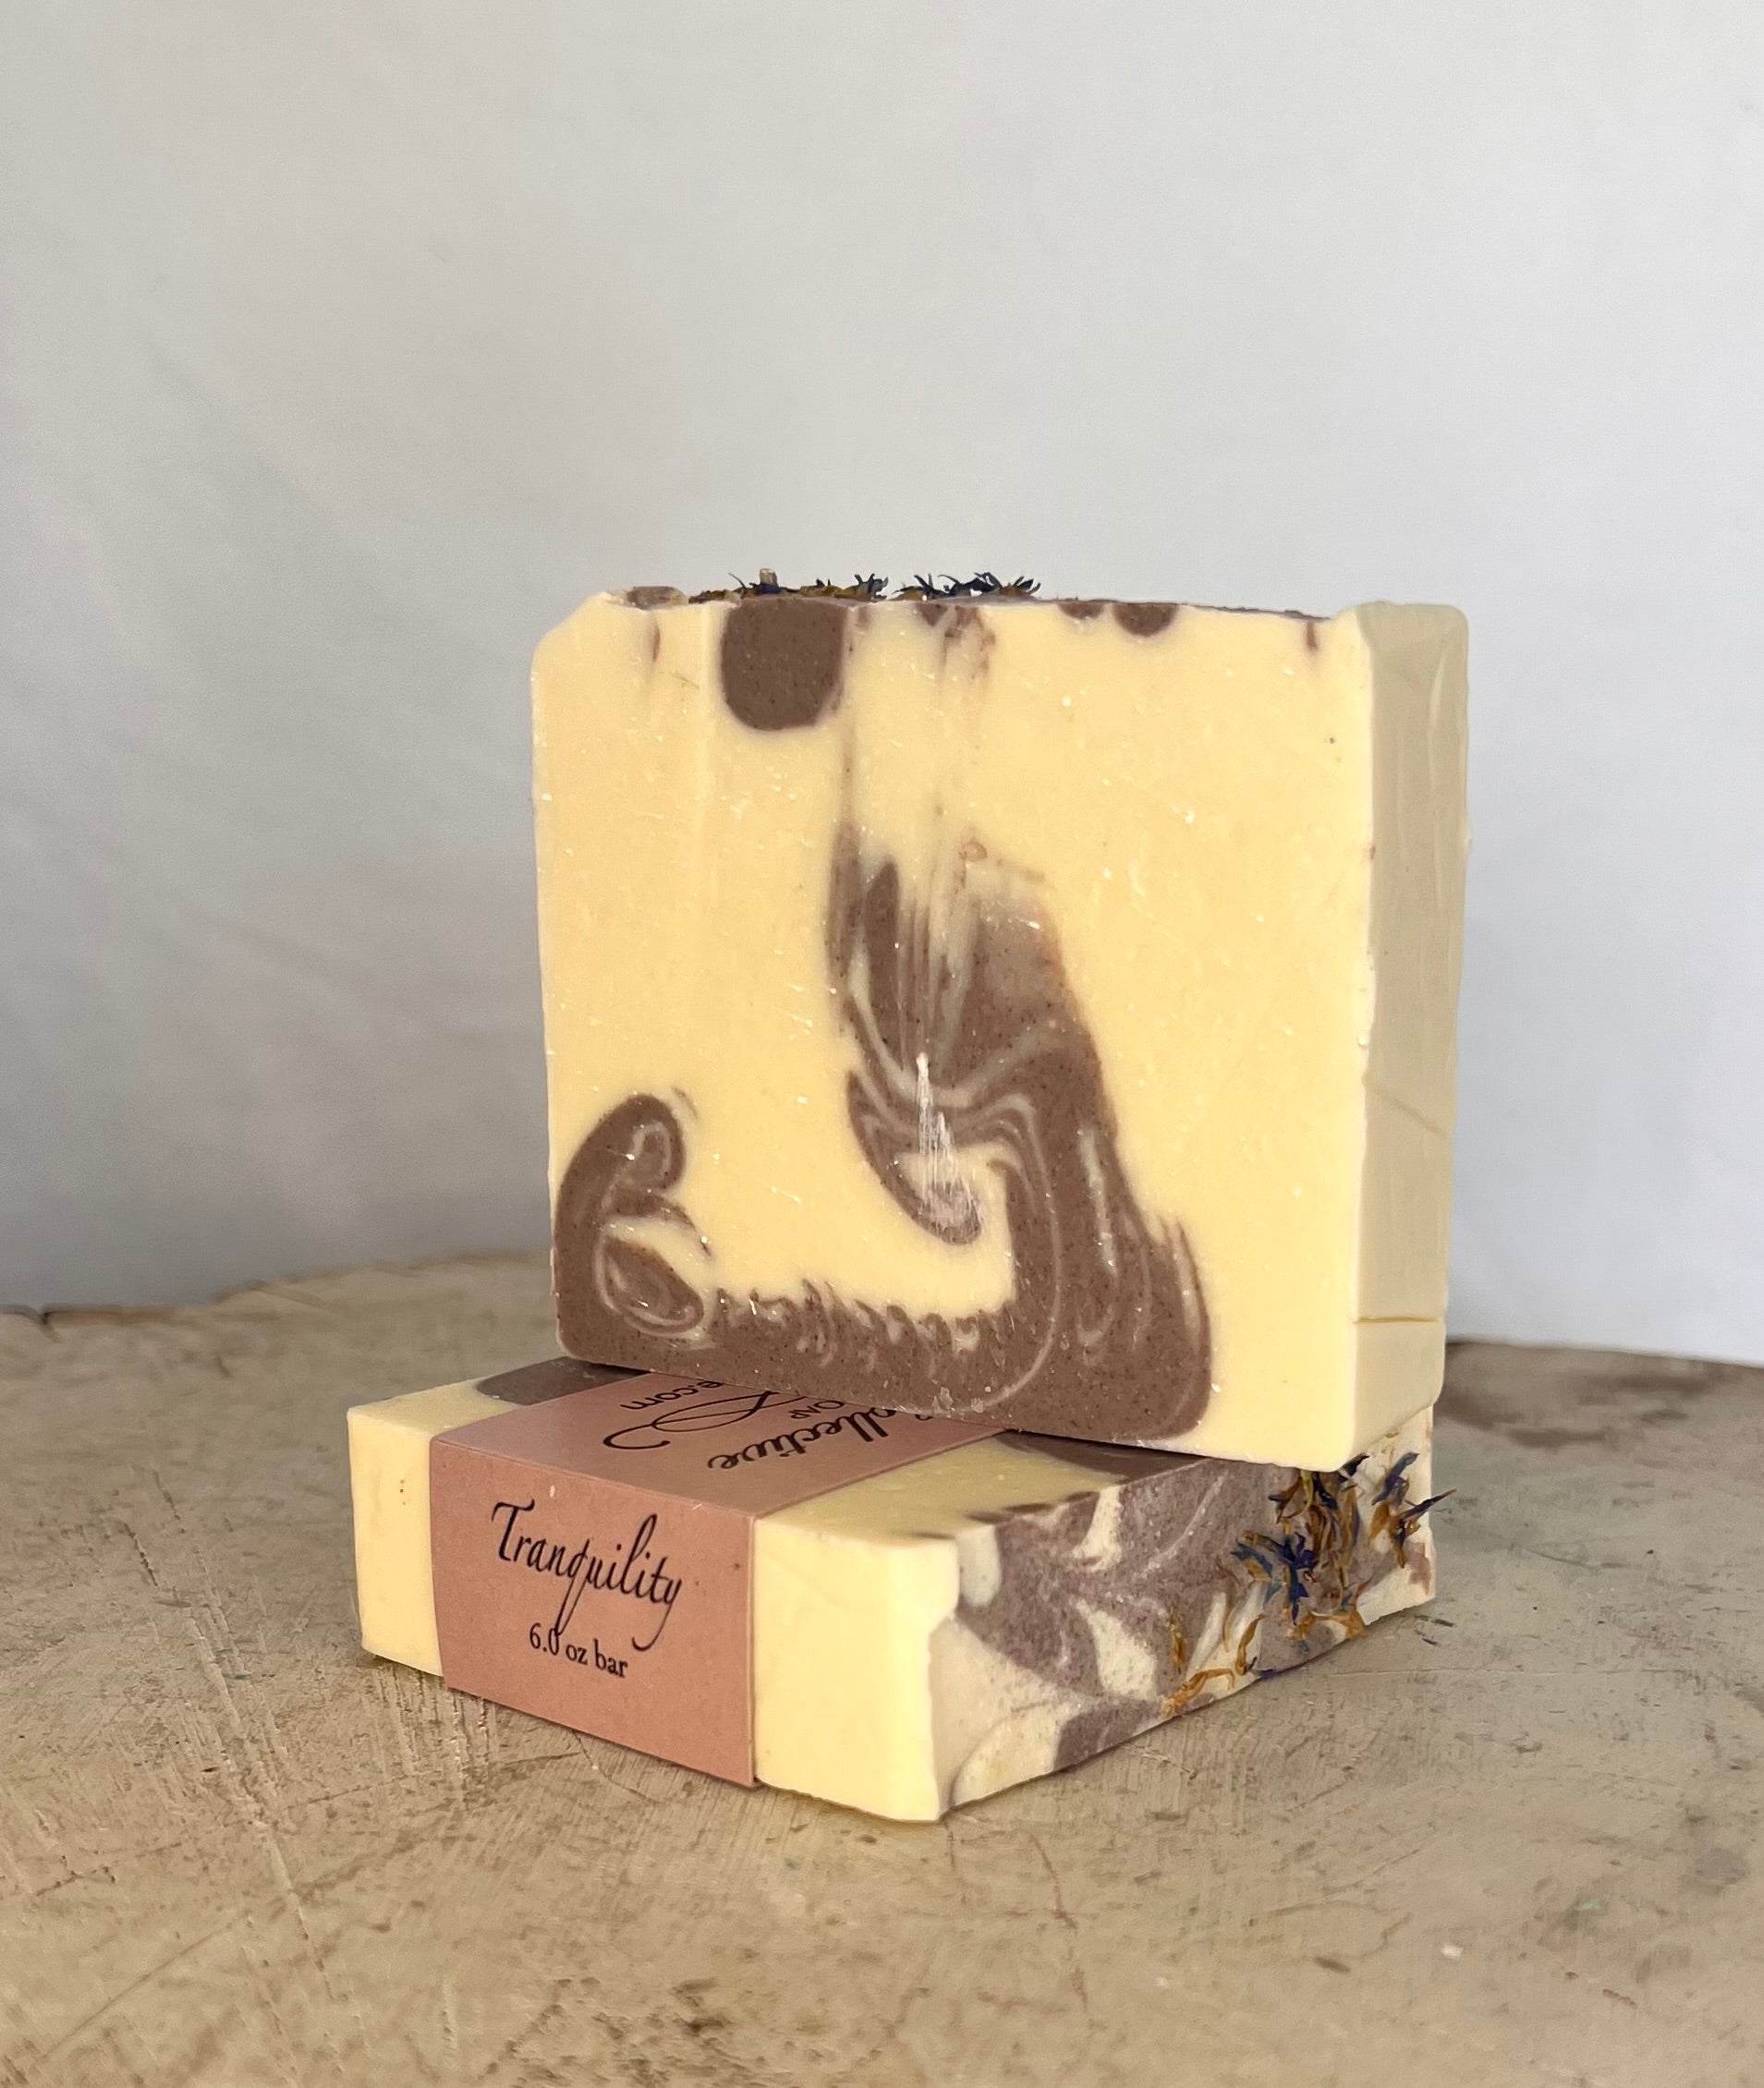 Tranquility - The Wooden Boar Soap Company